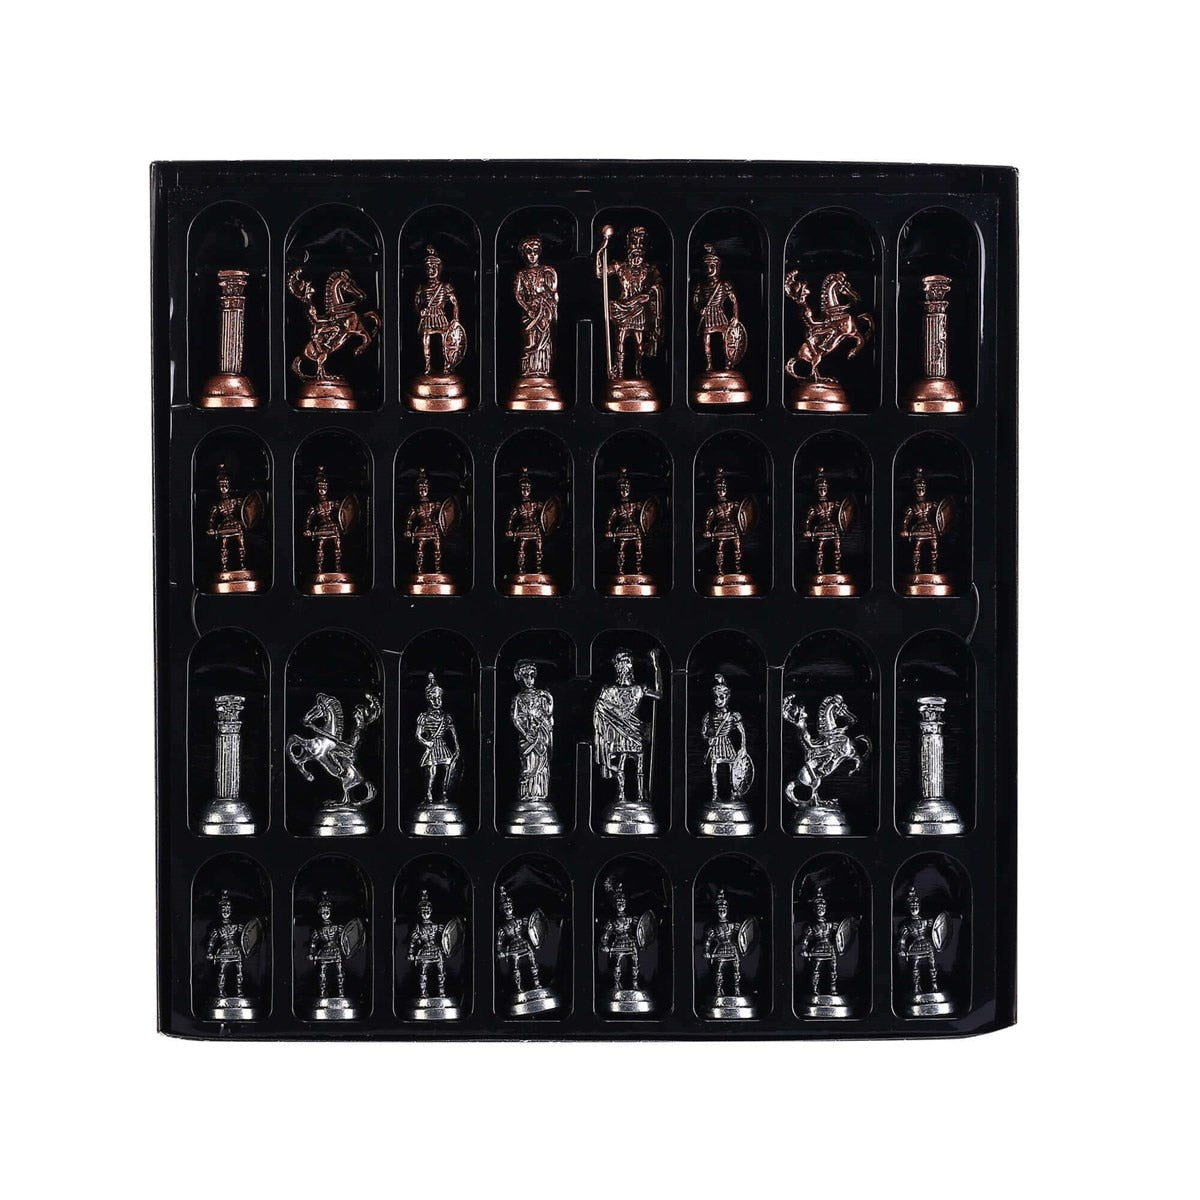 Historical Antique Copper and Metal Rome Figures Chess Set, Handmade Walnut Wood Chess Board Sculptures and Statues